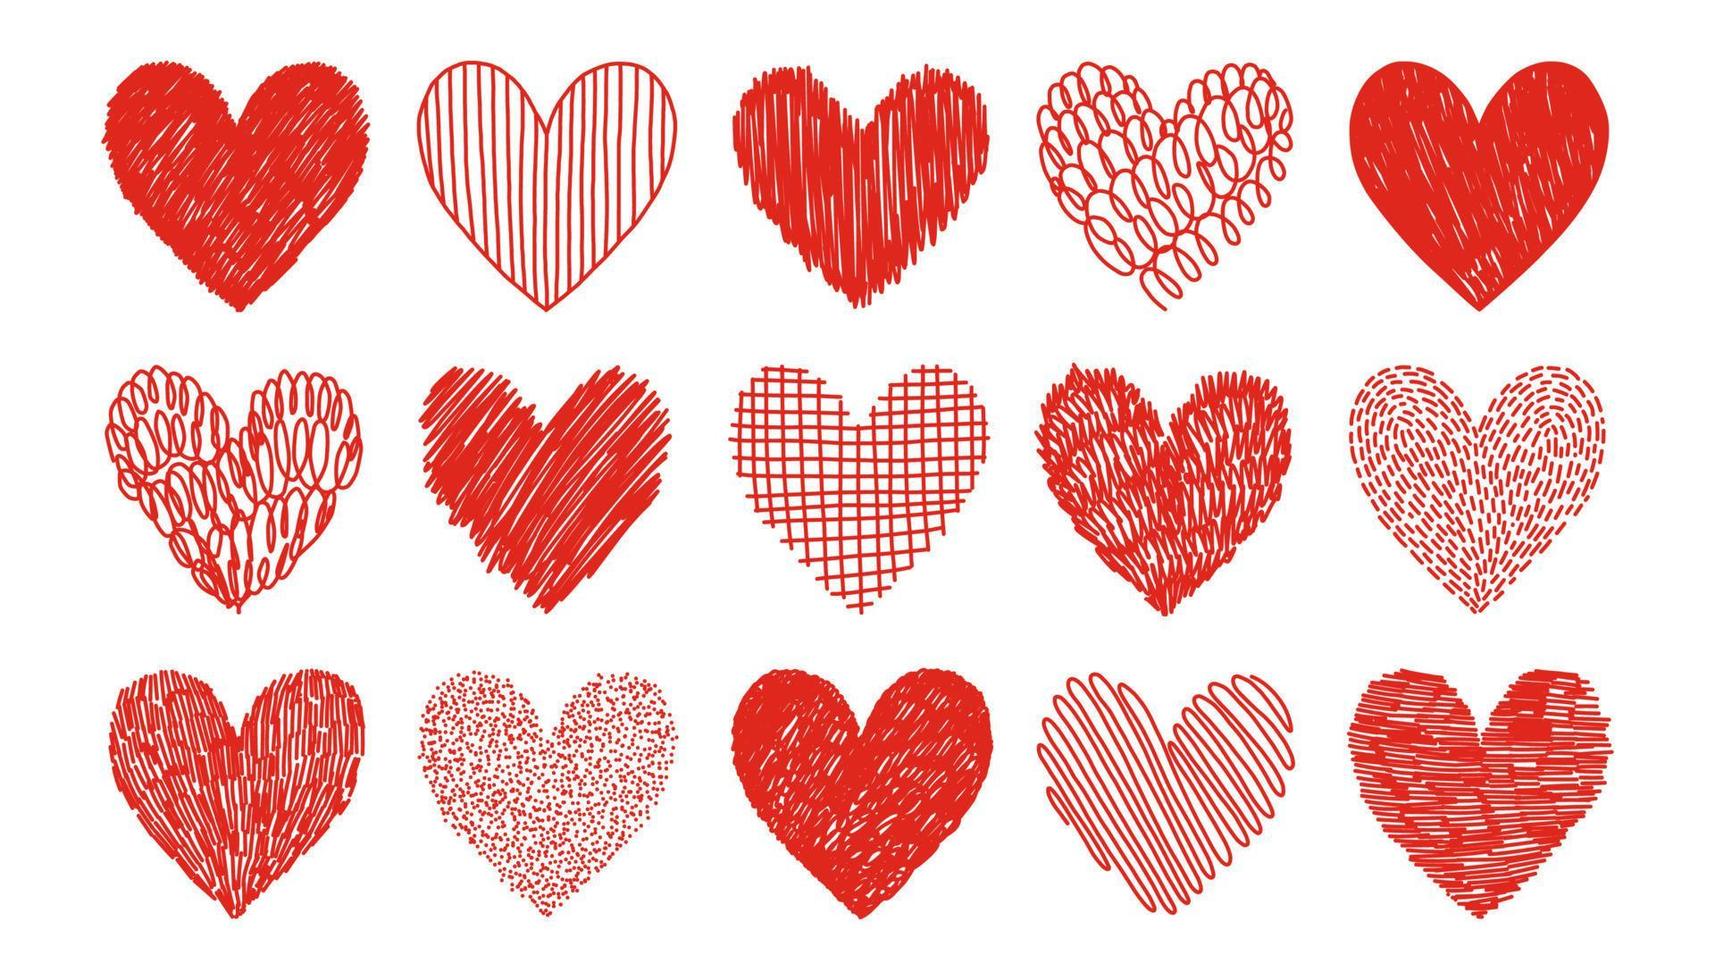 Hearts set. Hand drawn hearts. Design elements for Valentines day. Vector illustration